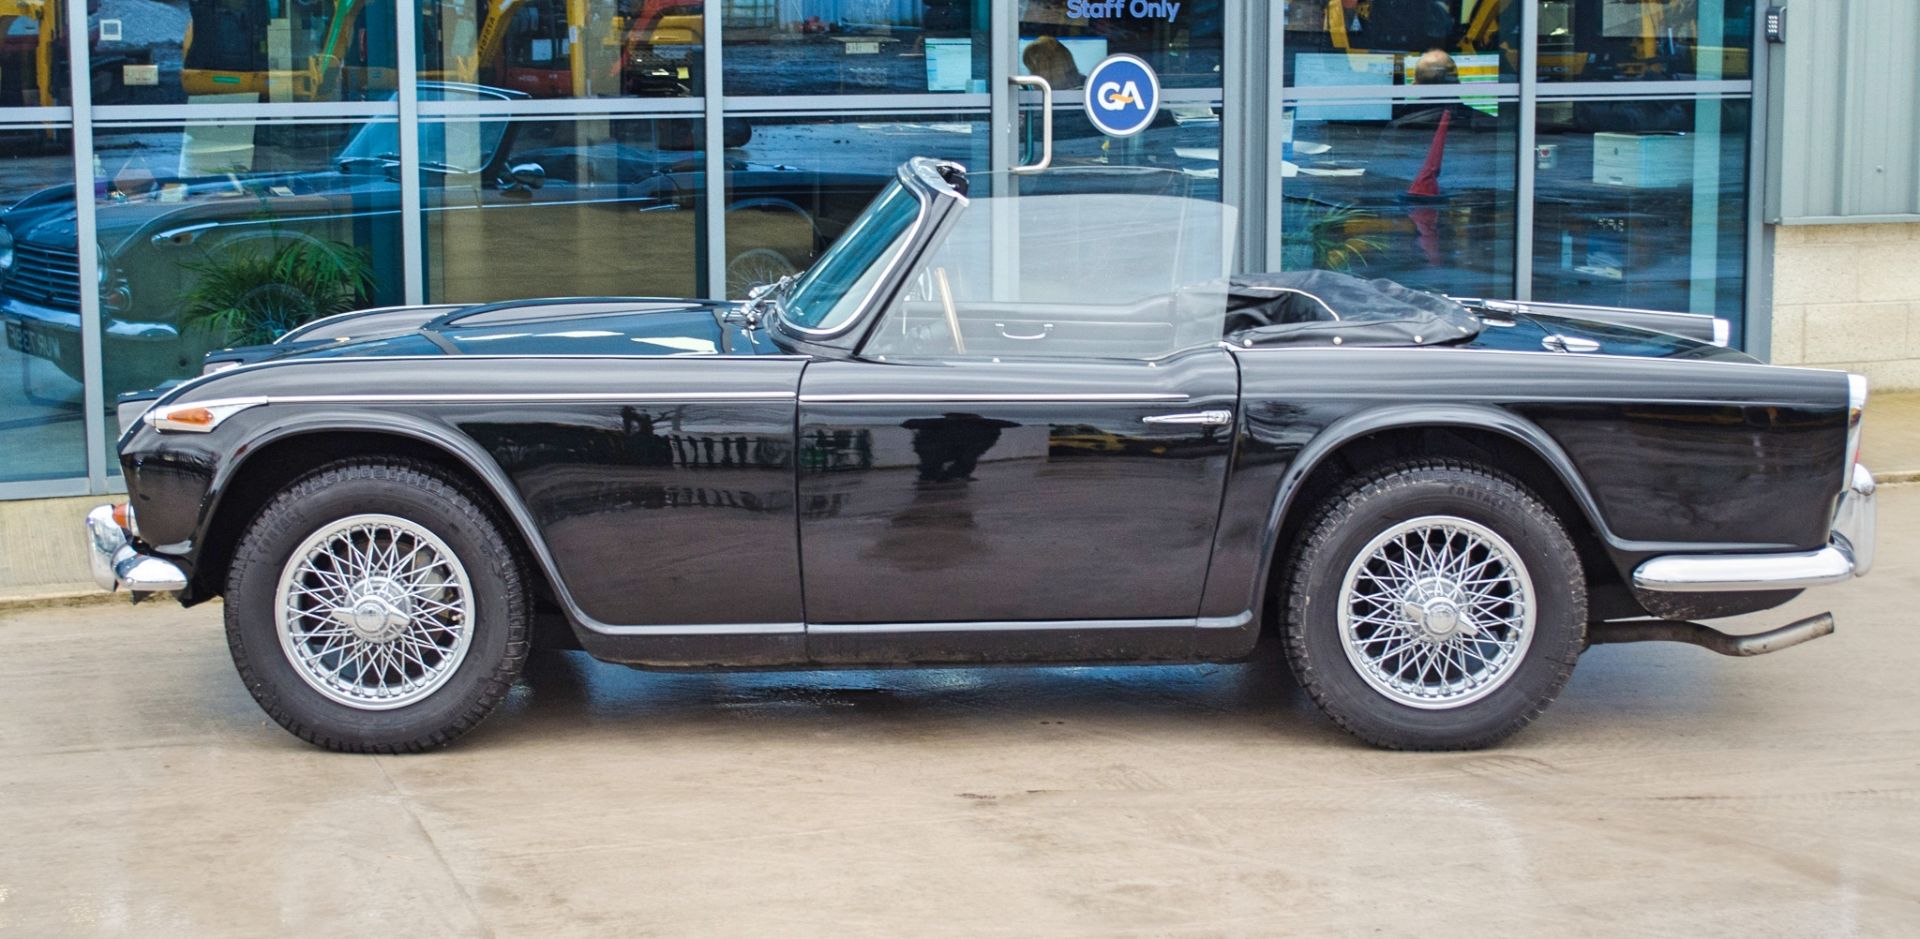 1967 Triumph TR4A IRS 2135cc convertible - Image 16 of 56